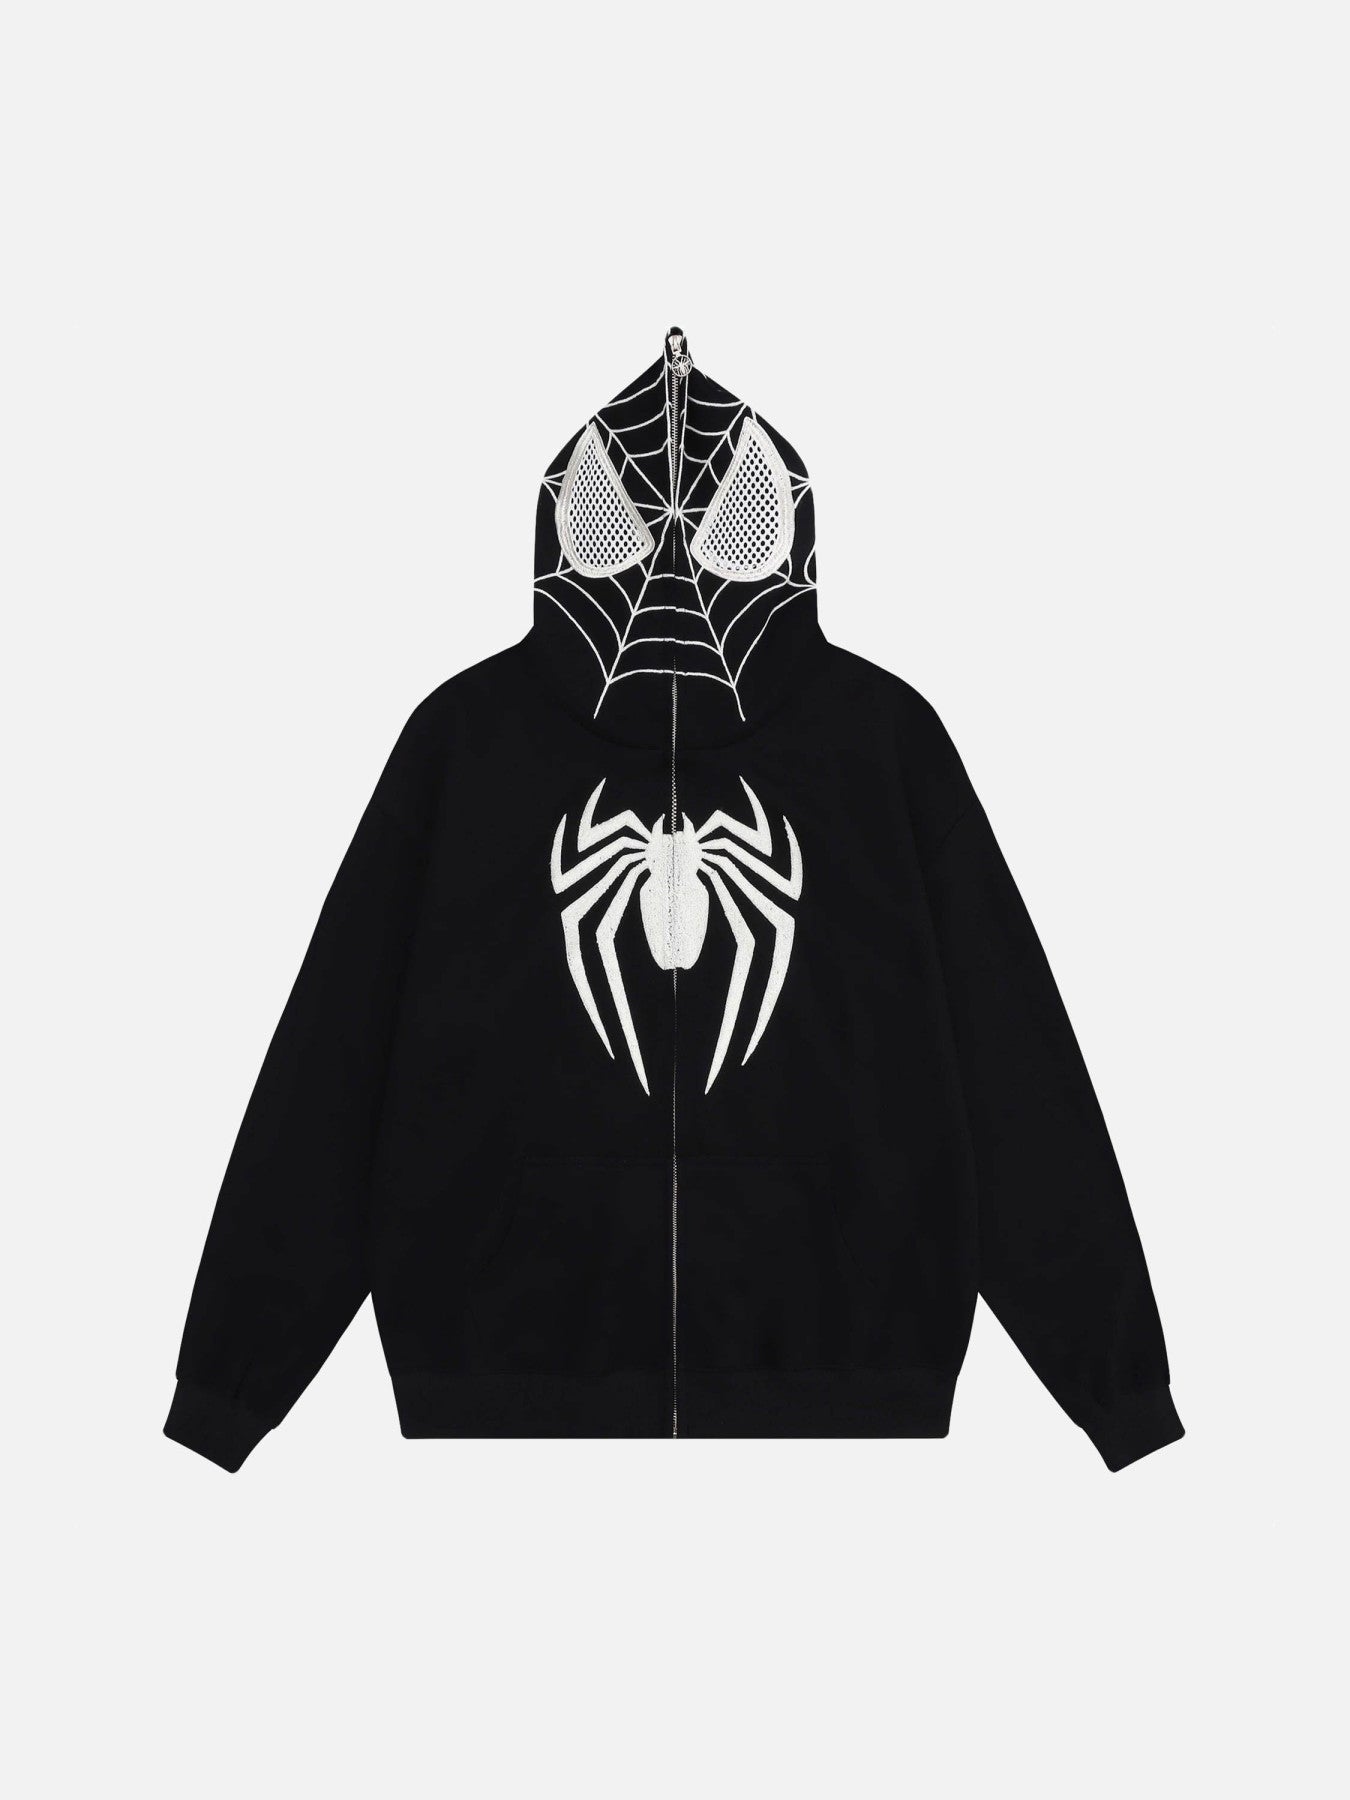 The Supermade Spider Web Embroidery Eye Viewable Hoodie